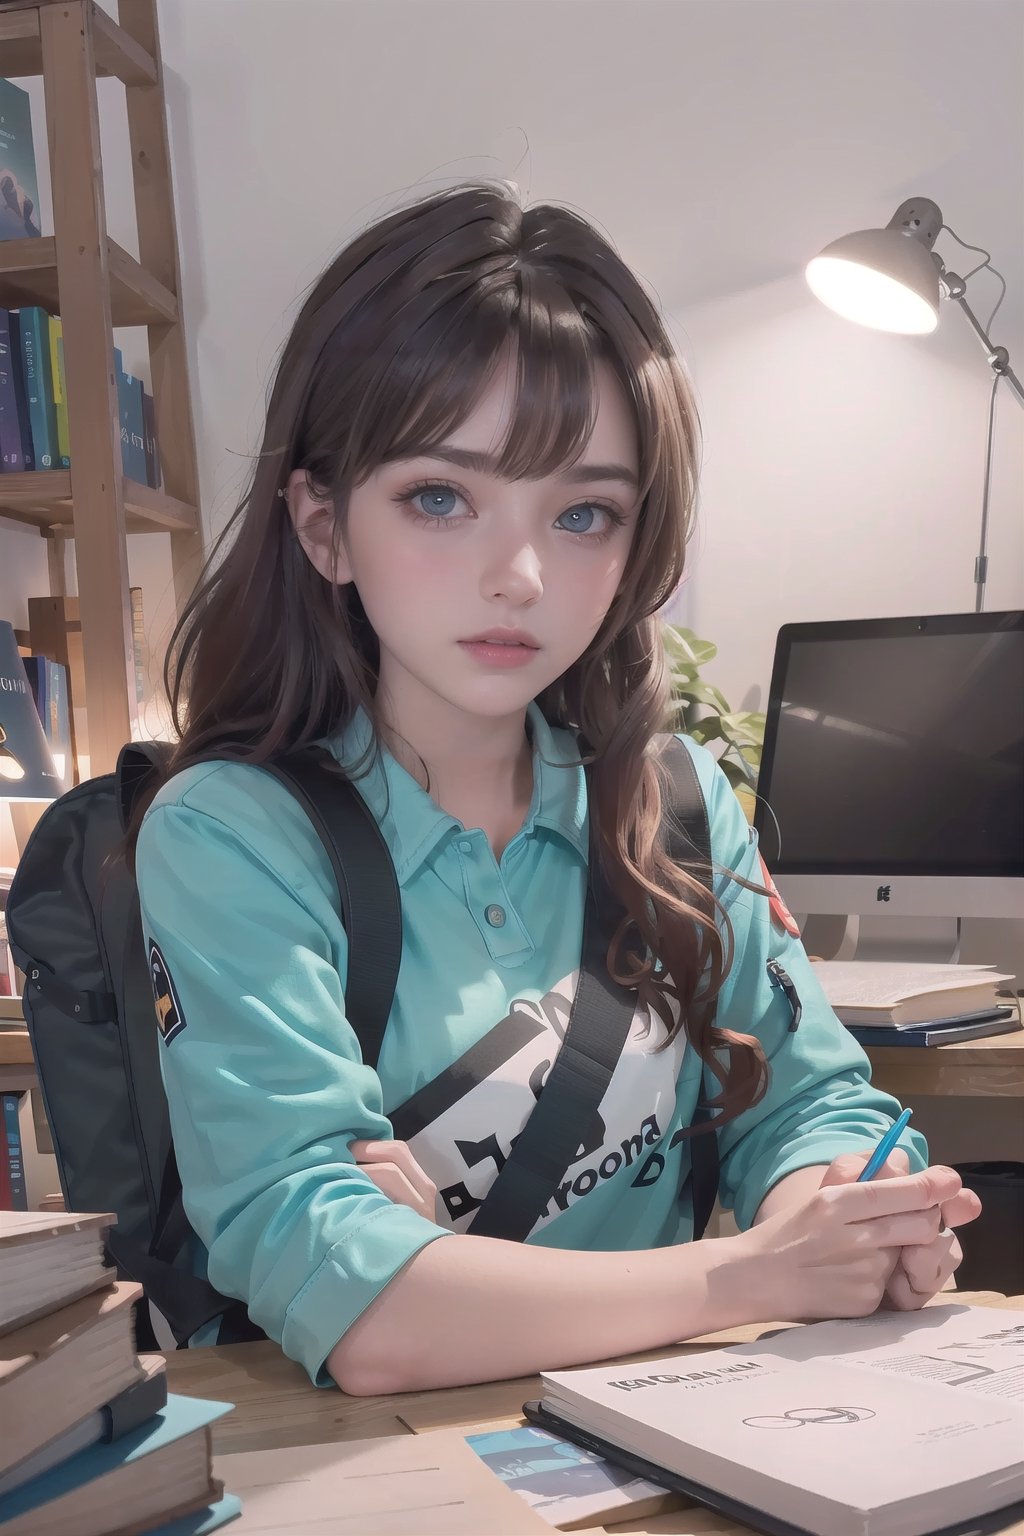 student girl, wearing a colorful backpack with patches and pins, holding a stack of books in her arms, a pencil behind her ear, glasses perched on her nose, sitting at a wooden desk in a bright and cozy study room, surrounded by bookshelves filled with books of various genres, a desk lamp casting a warm glow on the workspace, a laptop open with notes scattered on the screen, a motivational quote poster on the wall, capturing the studious and determined nature of the girl, in a realistic photographic style, shot with a Canon EOS 5D Mark IV camera, 50mm lens, capturing a depth of field that highlights the girl’s face and books,
